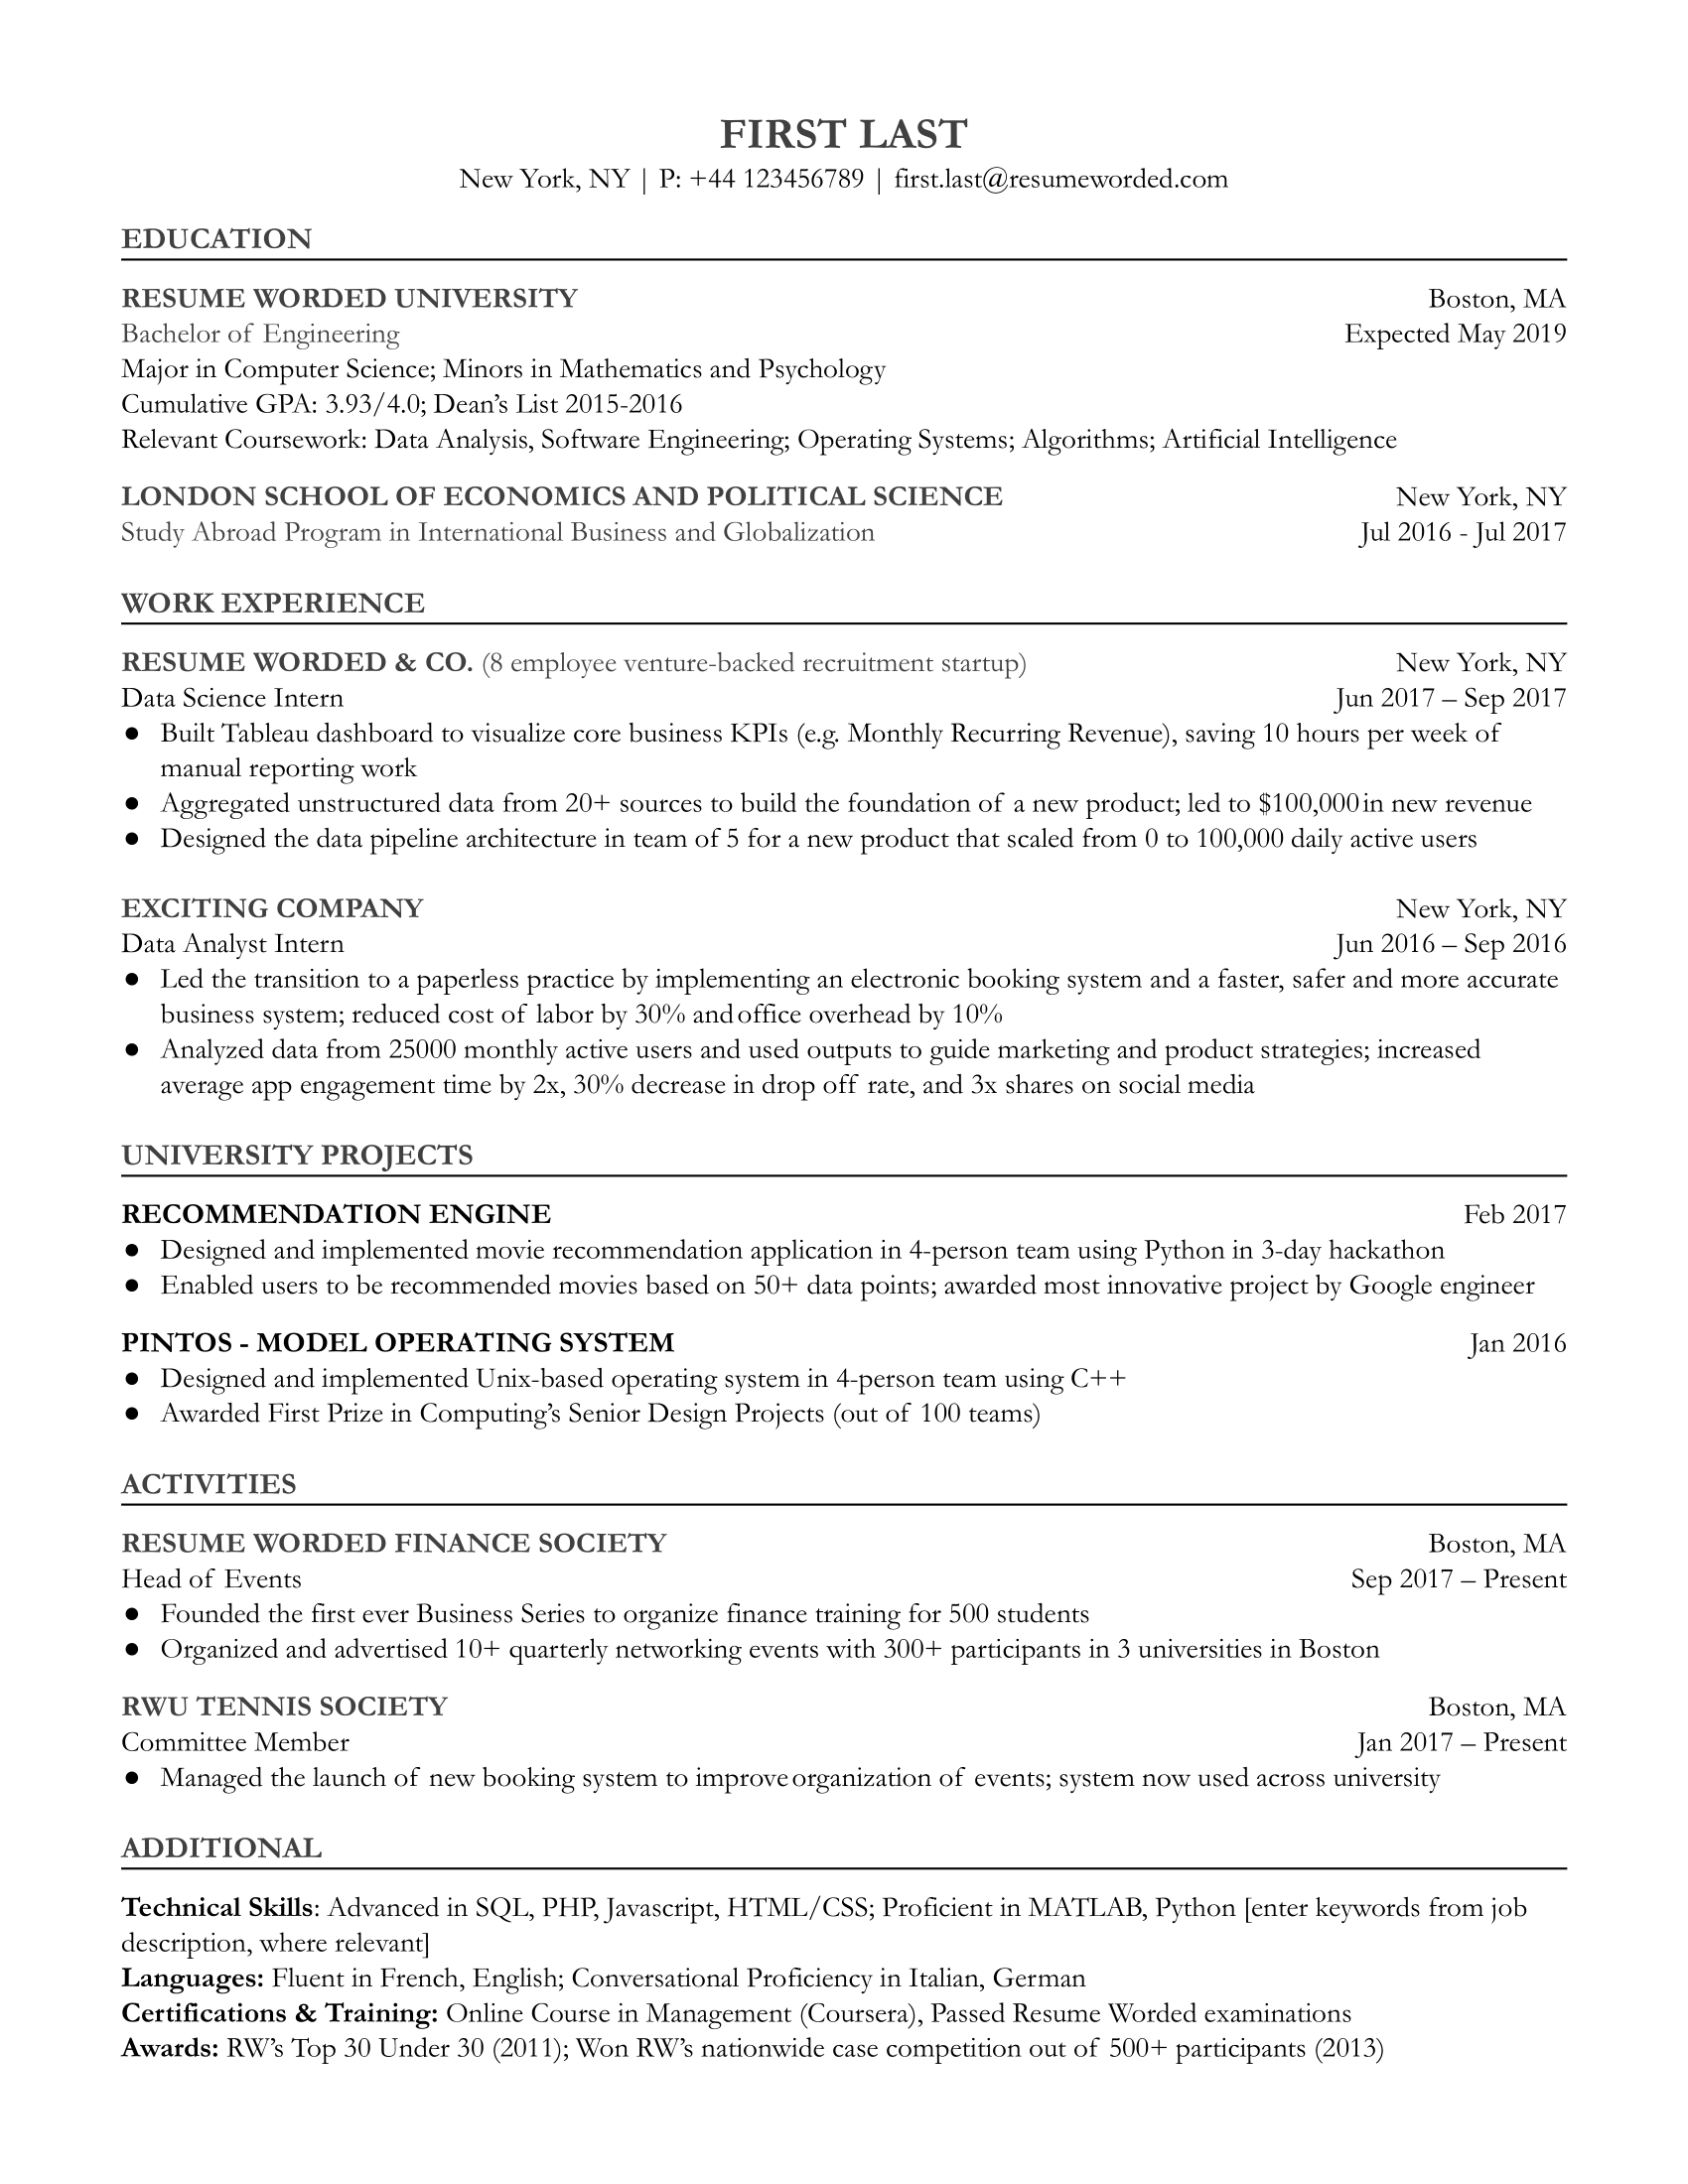 Entry level data science resume: When you don’t have much on the field experience, use the skills and projects you’ve done that are related to data science to communicate how effective you can be for the role.